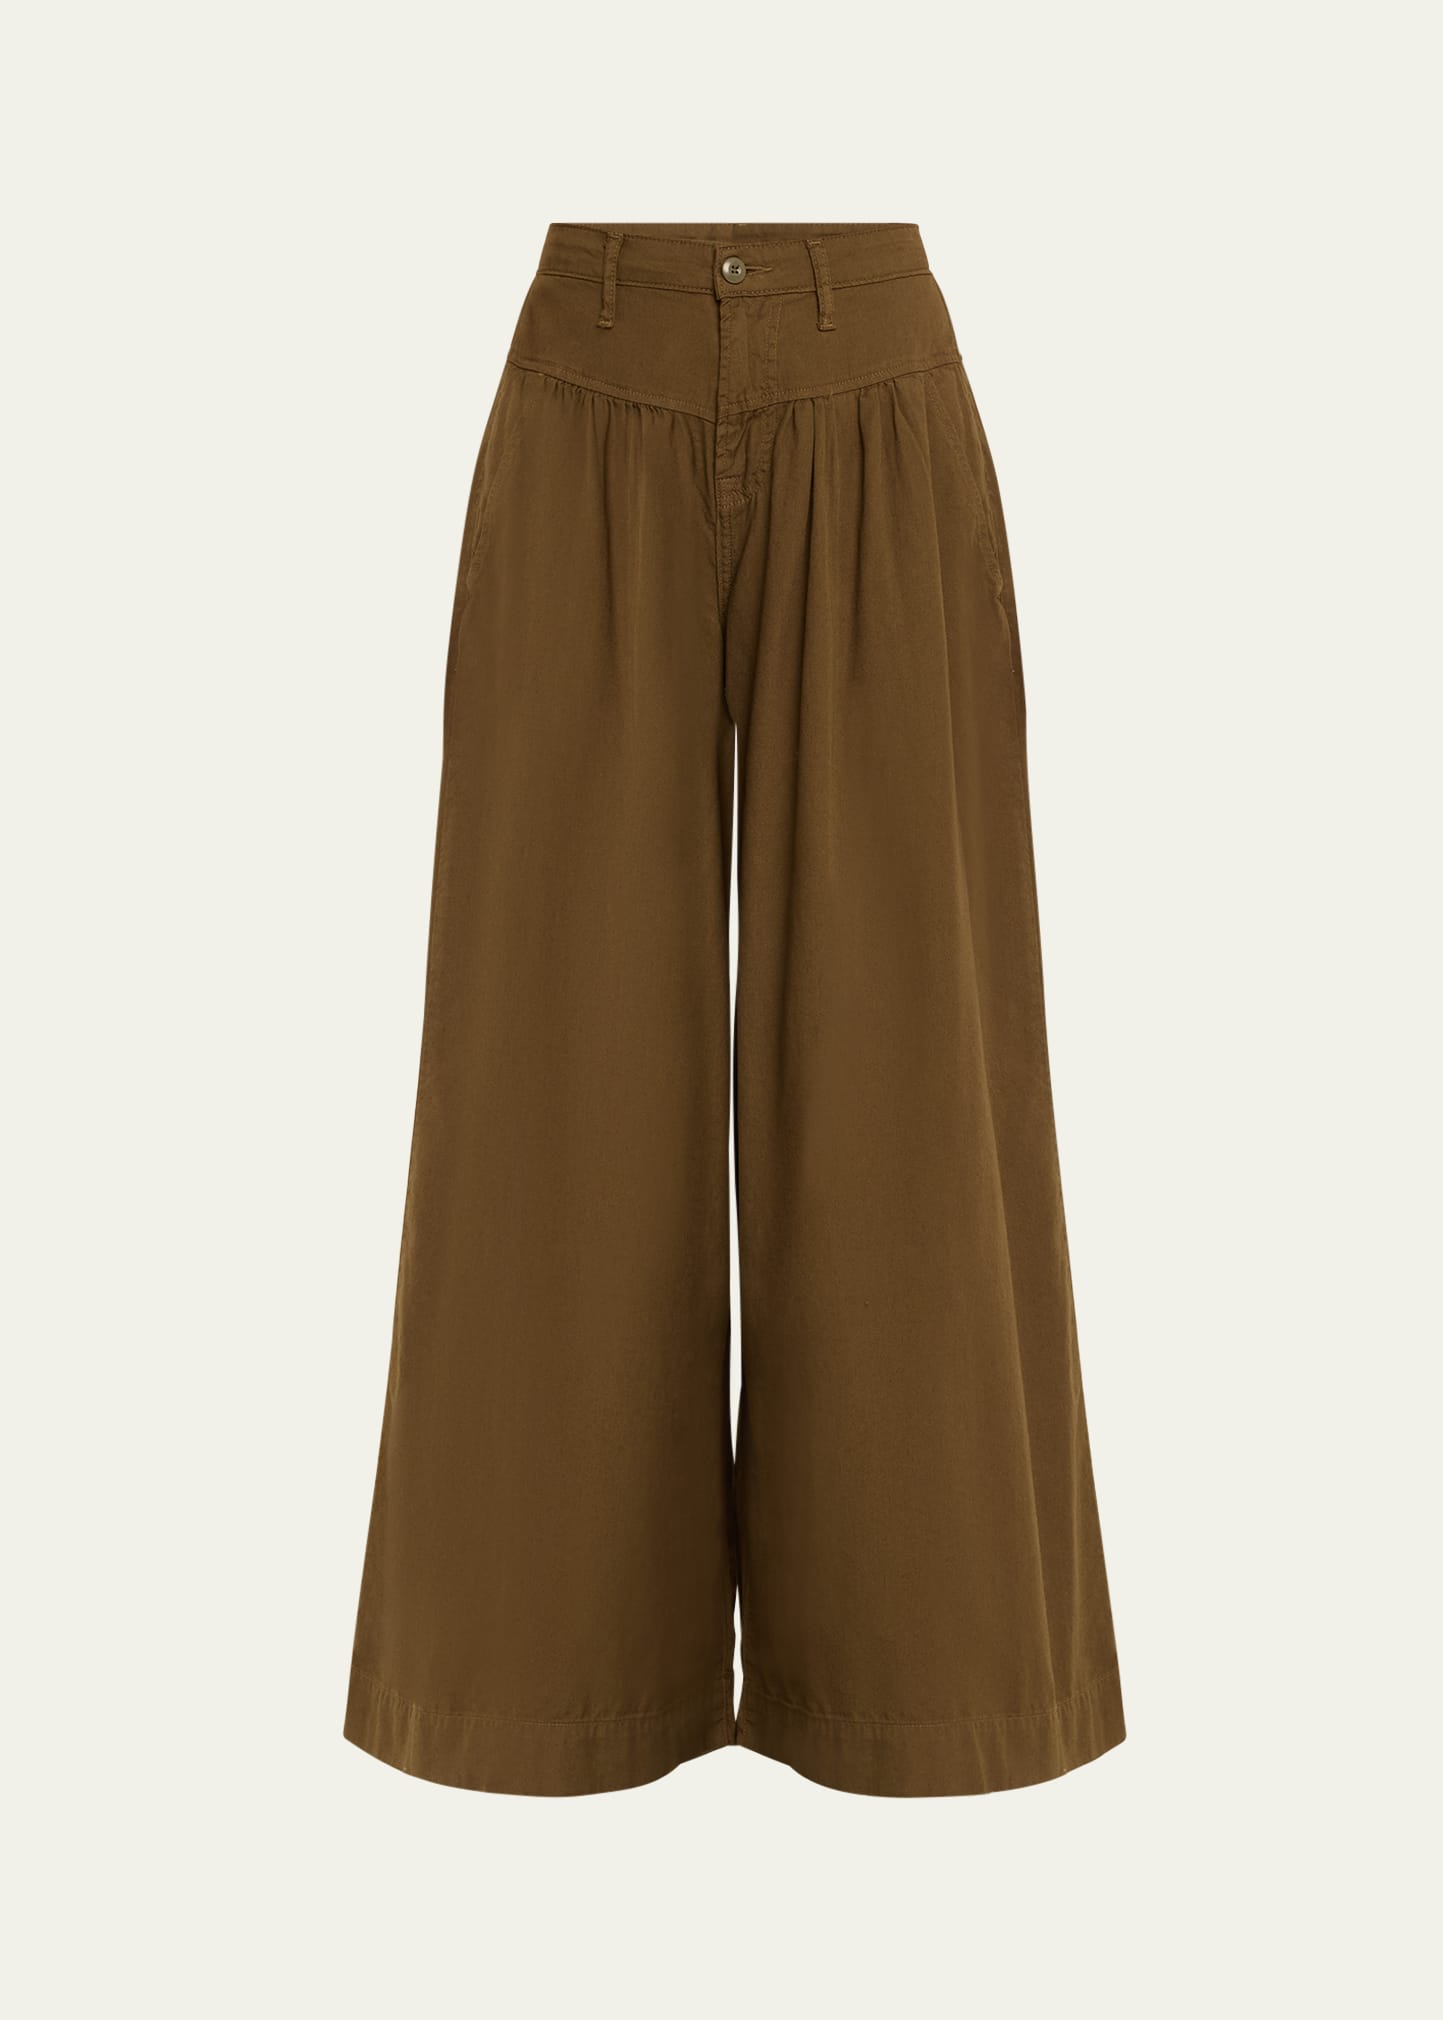 Nsf Clothing Talise Super Wide-leg Cotton Poplin Pants In Colonial